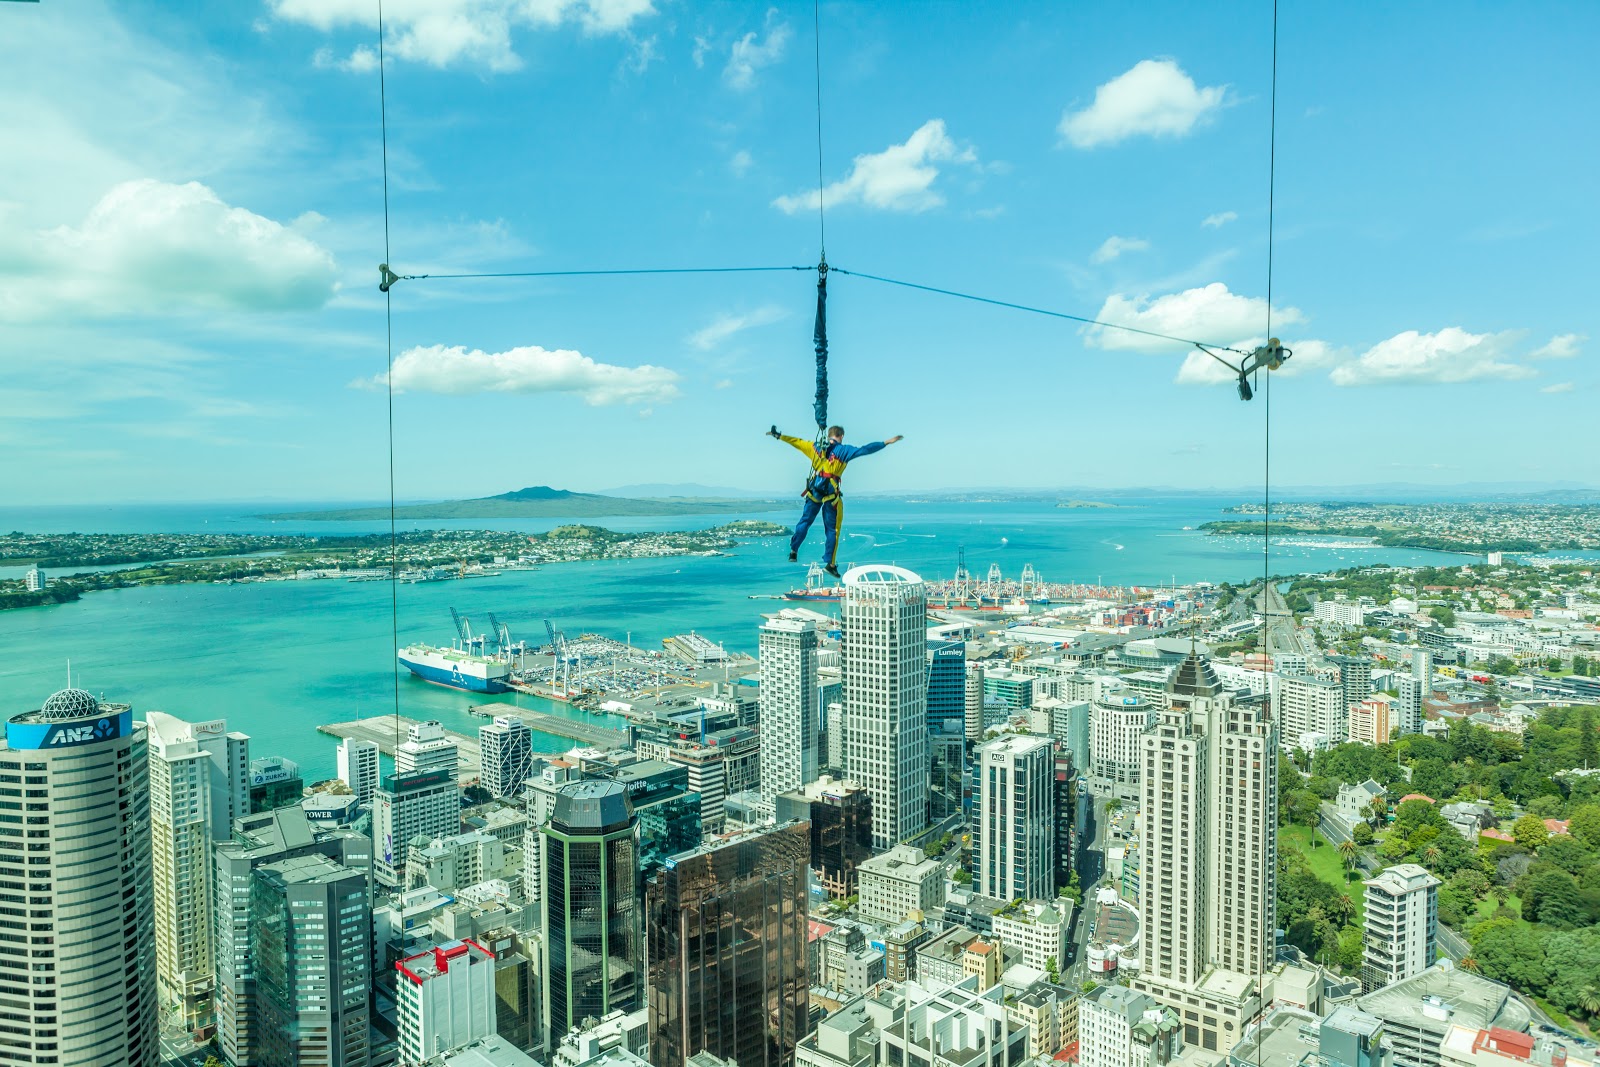 One of the many ways to view the Auckland skyline: jumping off the Skytower.